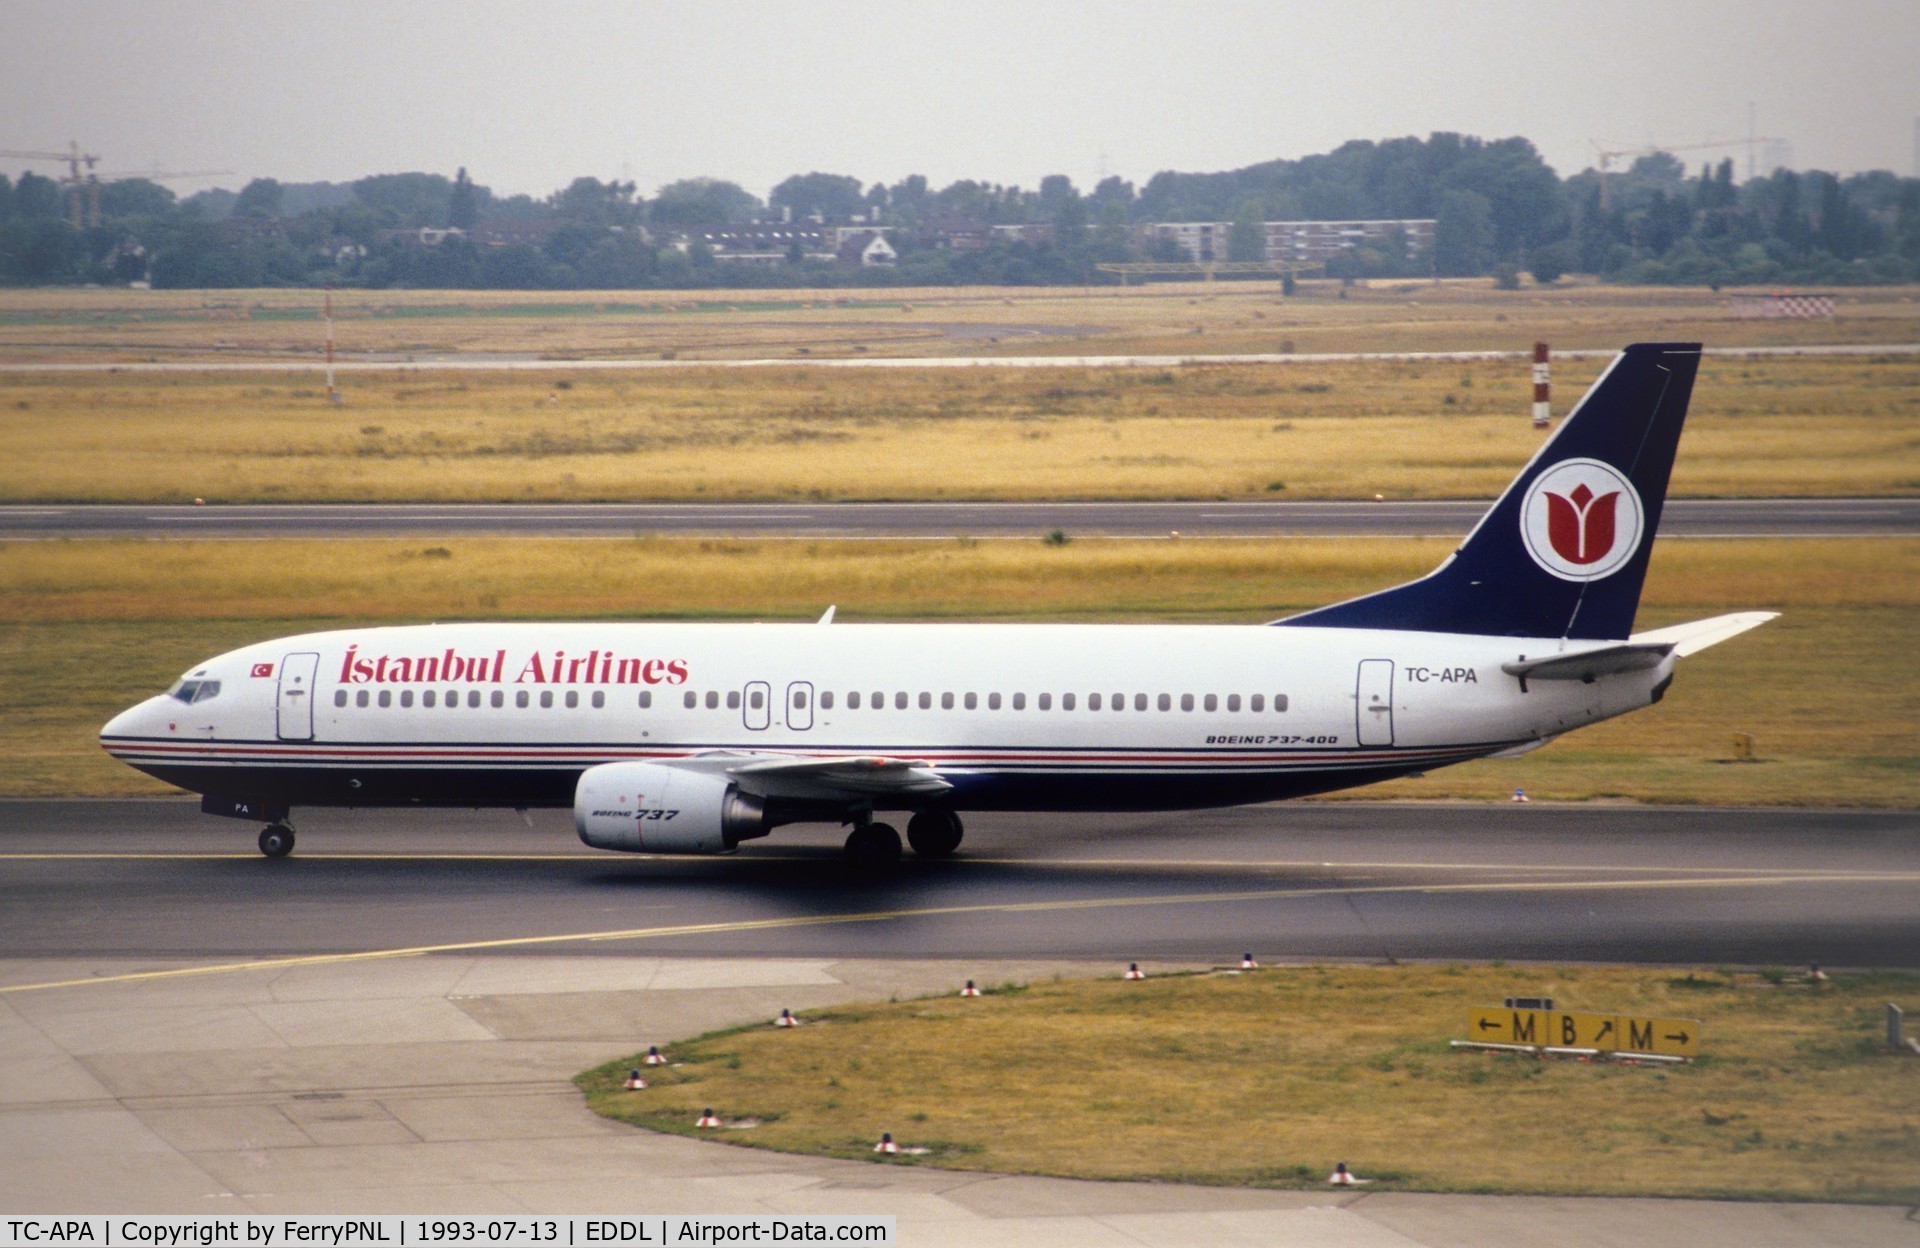 TC-APA, 1992 Boeing 737-4S3 C/N 25595, Istanbul B734. Aircraft still active with ASL France.